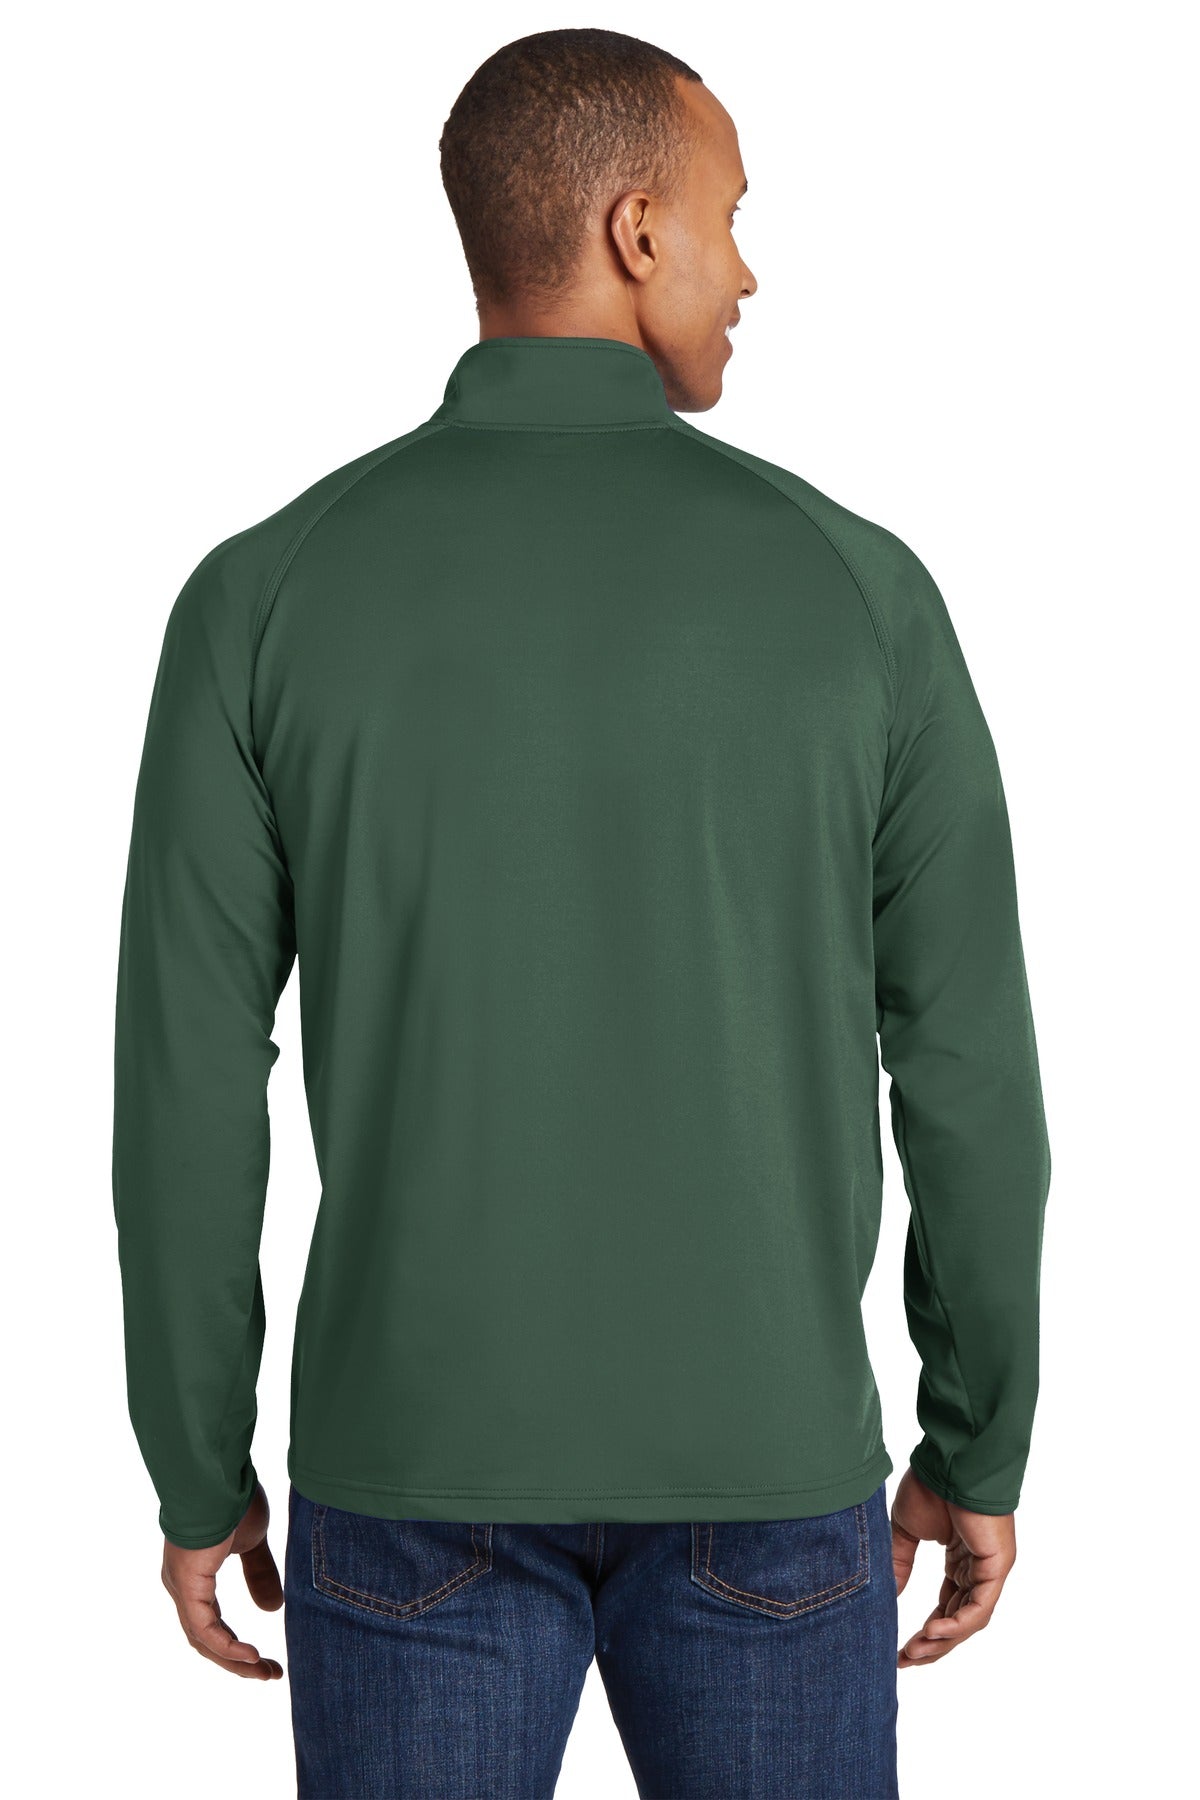 Swaasi Core - Sport-Tek® Sport-Wick® Stretch 1/2-Zip Pullover with EMB Logo